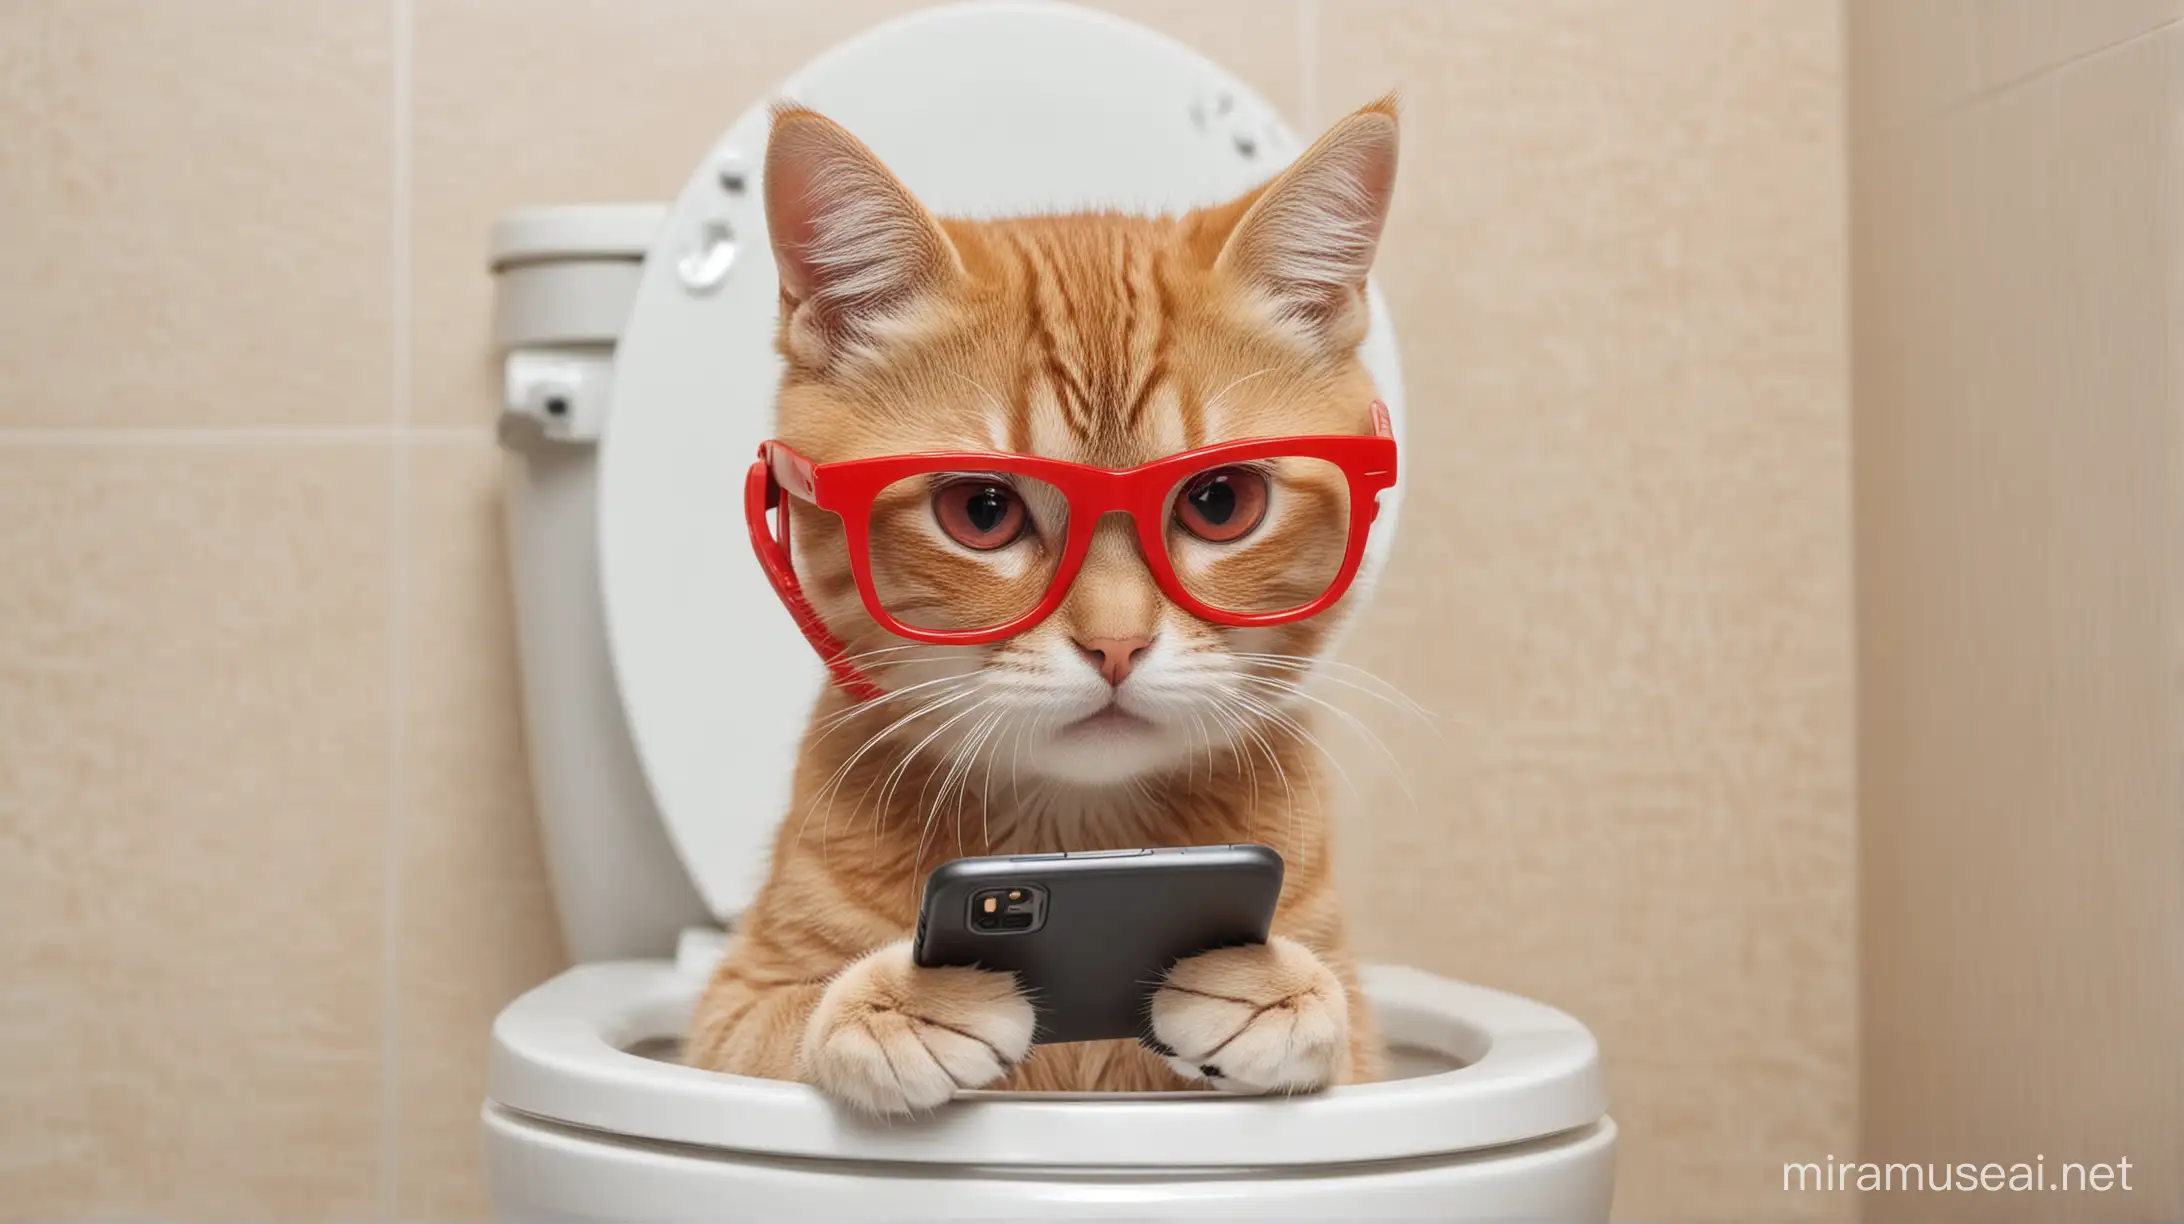 A little cat wearing red glasses is playing on the phone in the toilet.